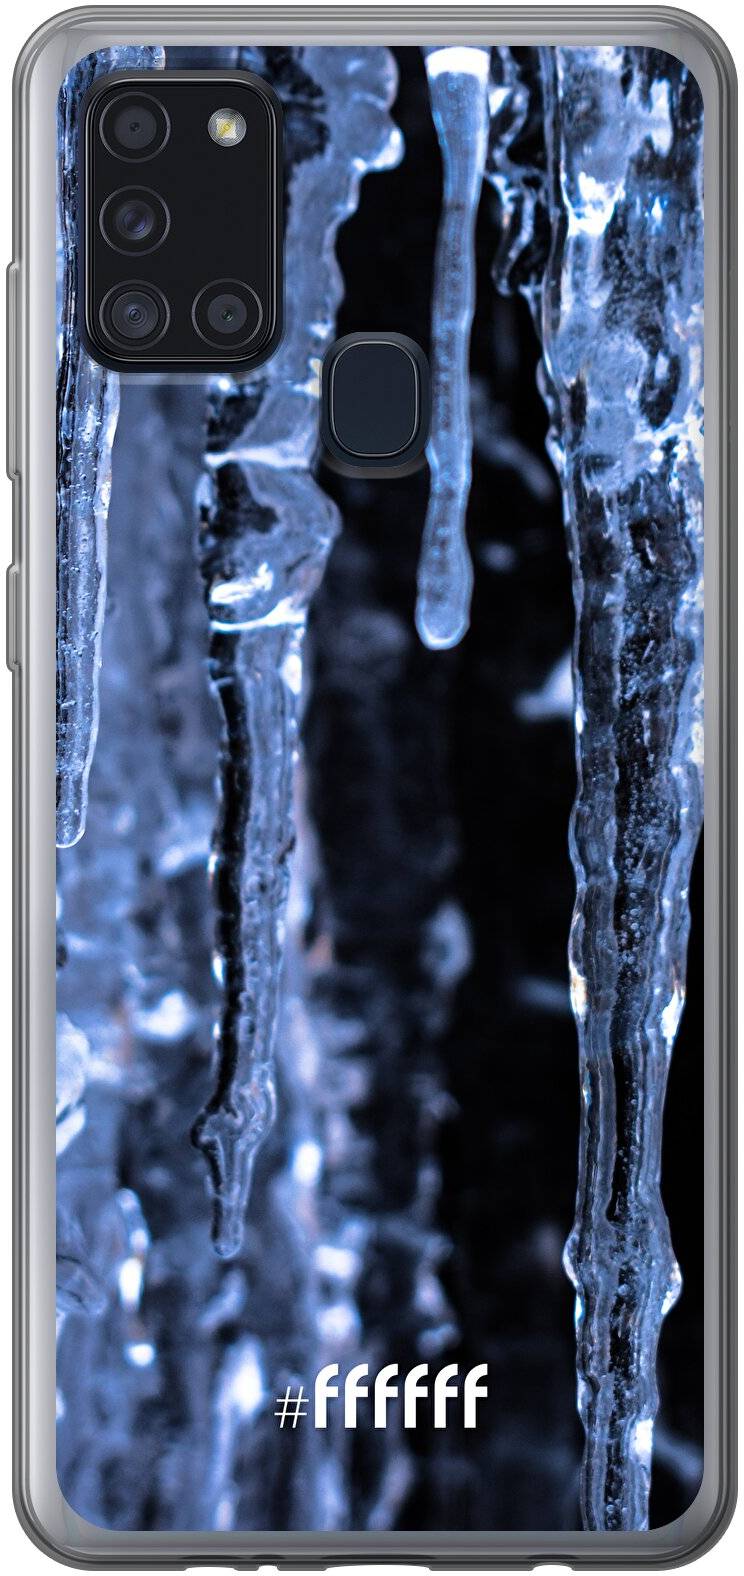 Icicles Galaxy A21s